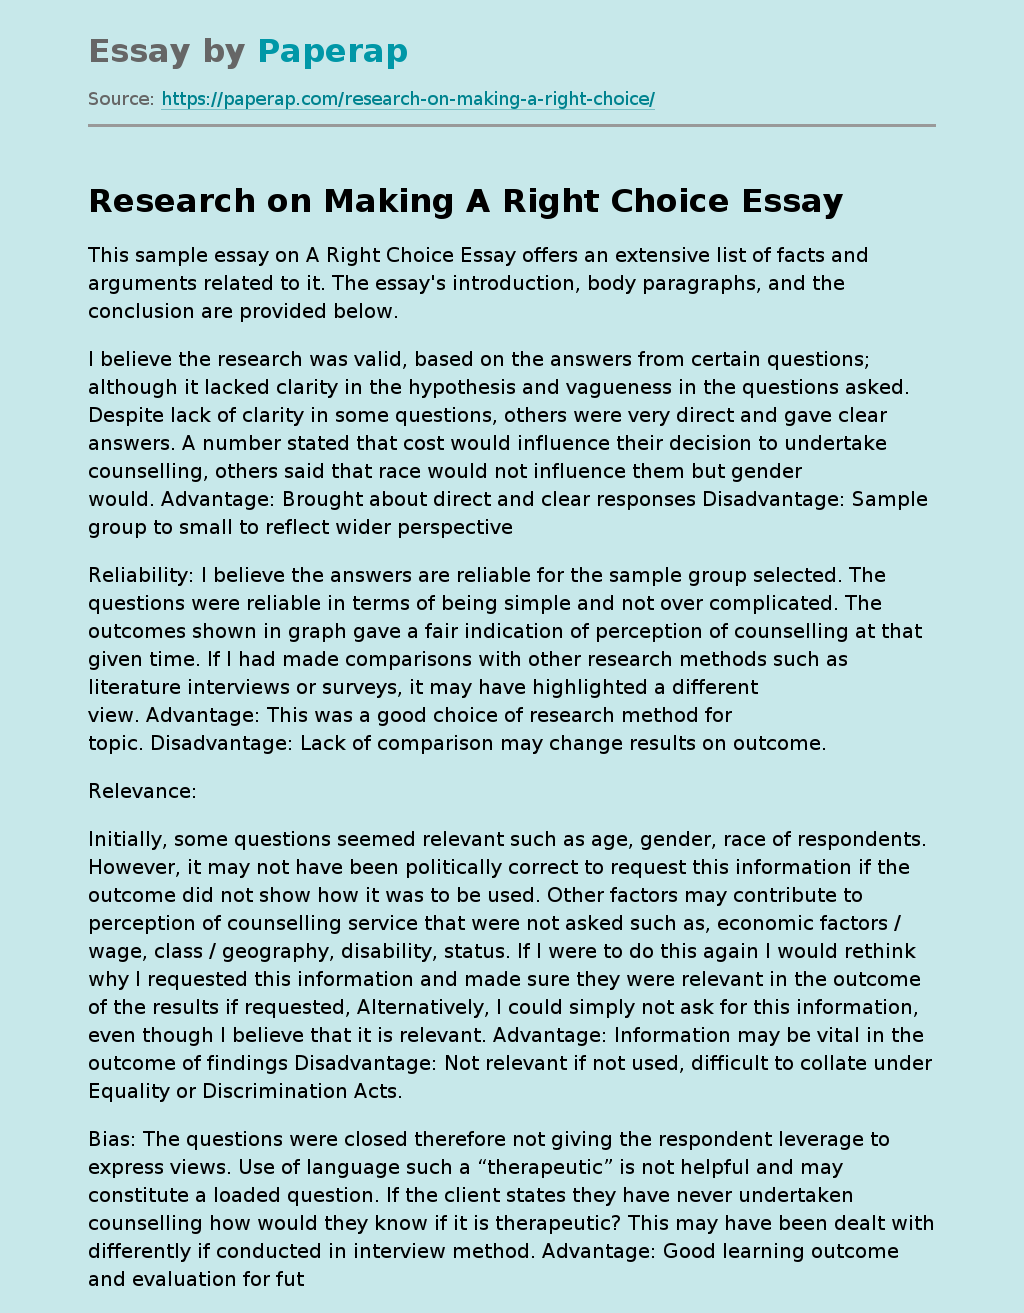 Research on Making A Right Choice